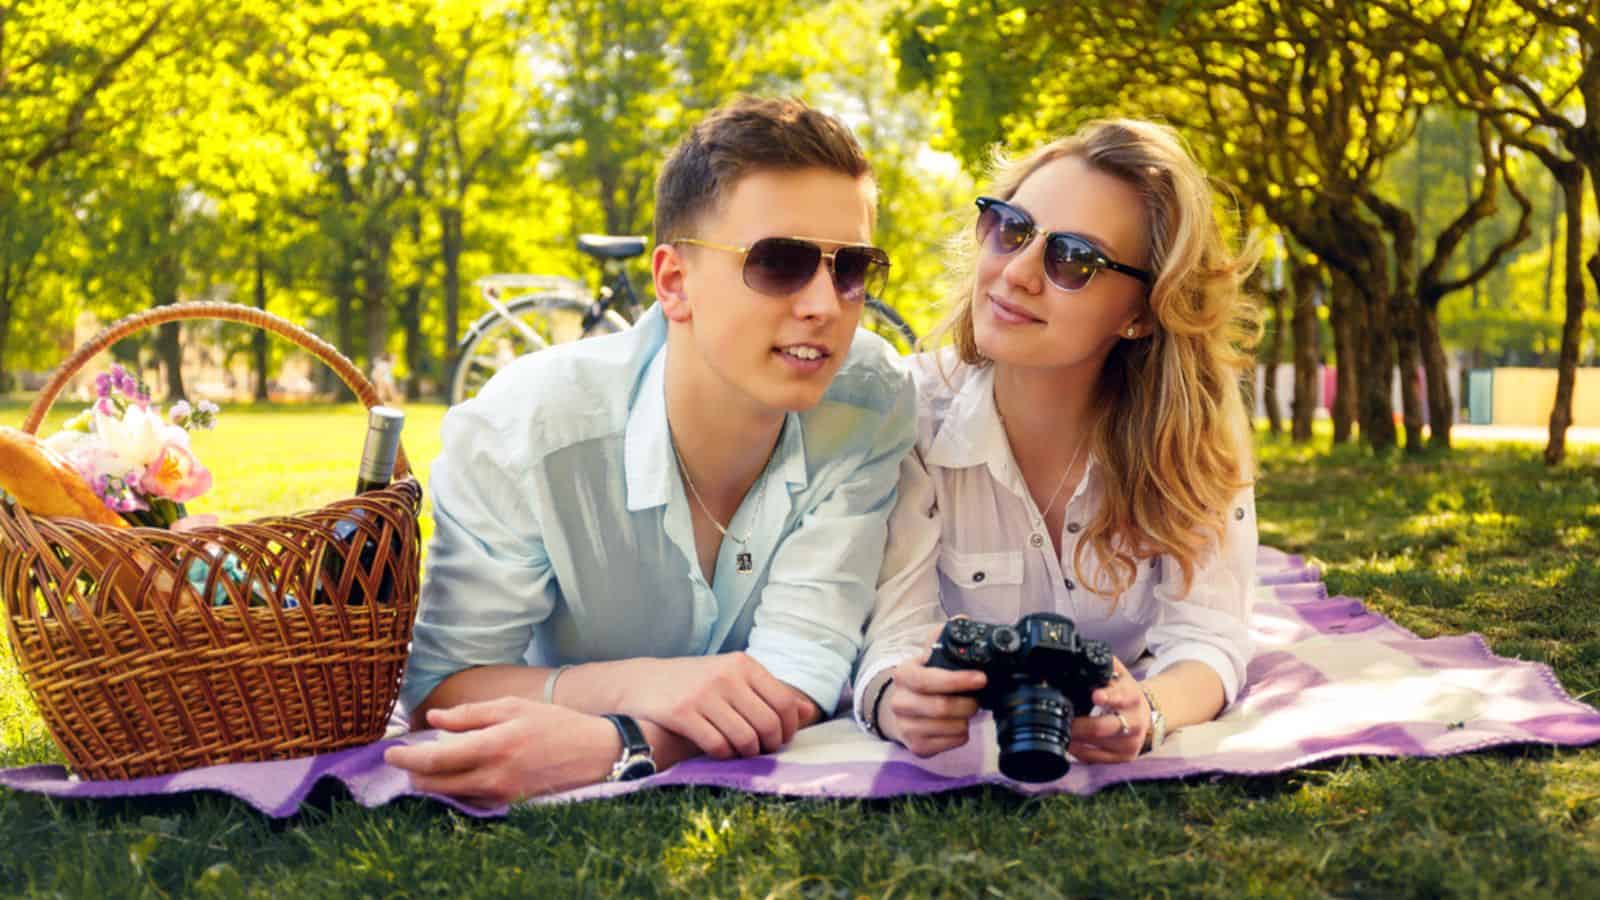 Lovely couple on picnic